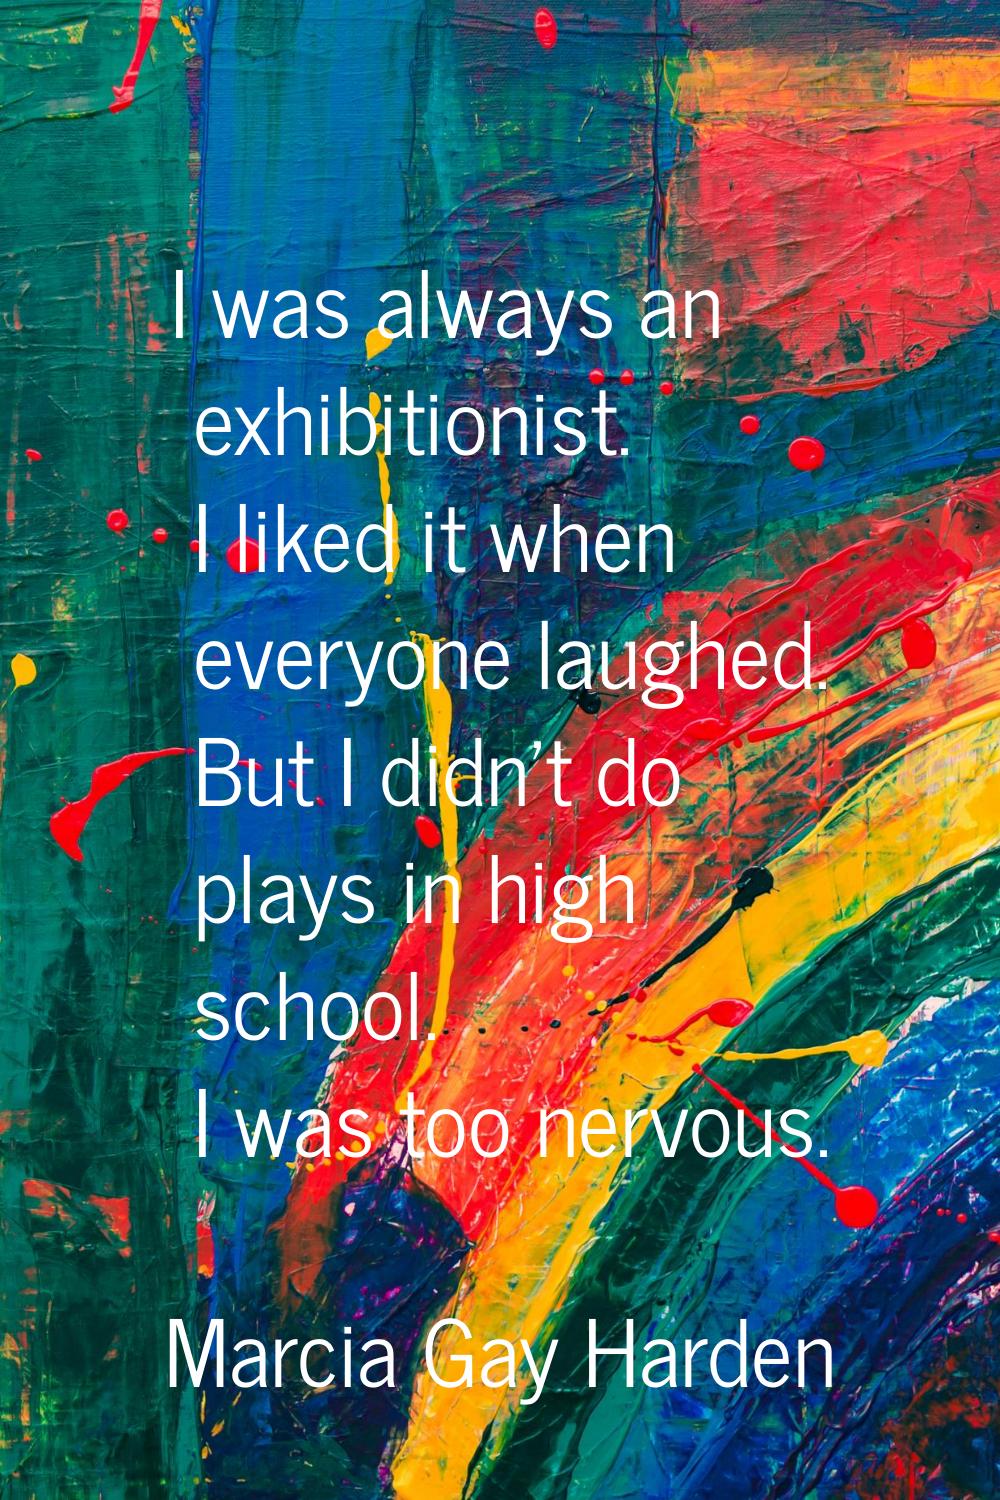 I was always an exhibitionist. I liked it when everyone laughed. But I didn't do plays in high scho